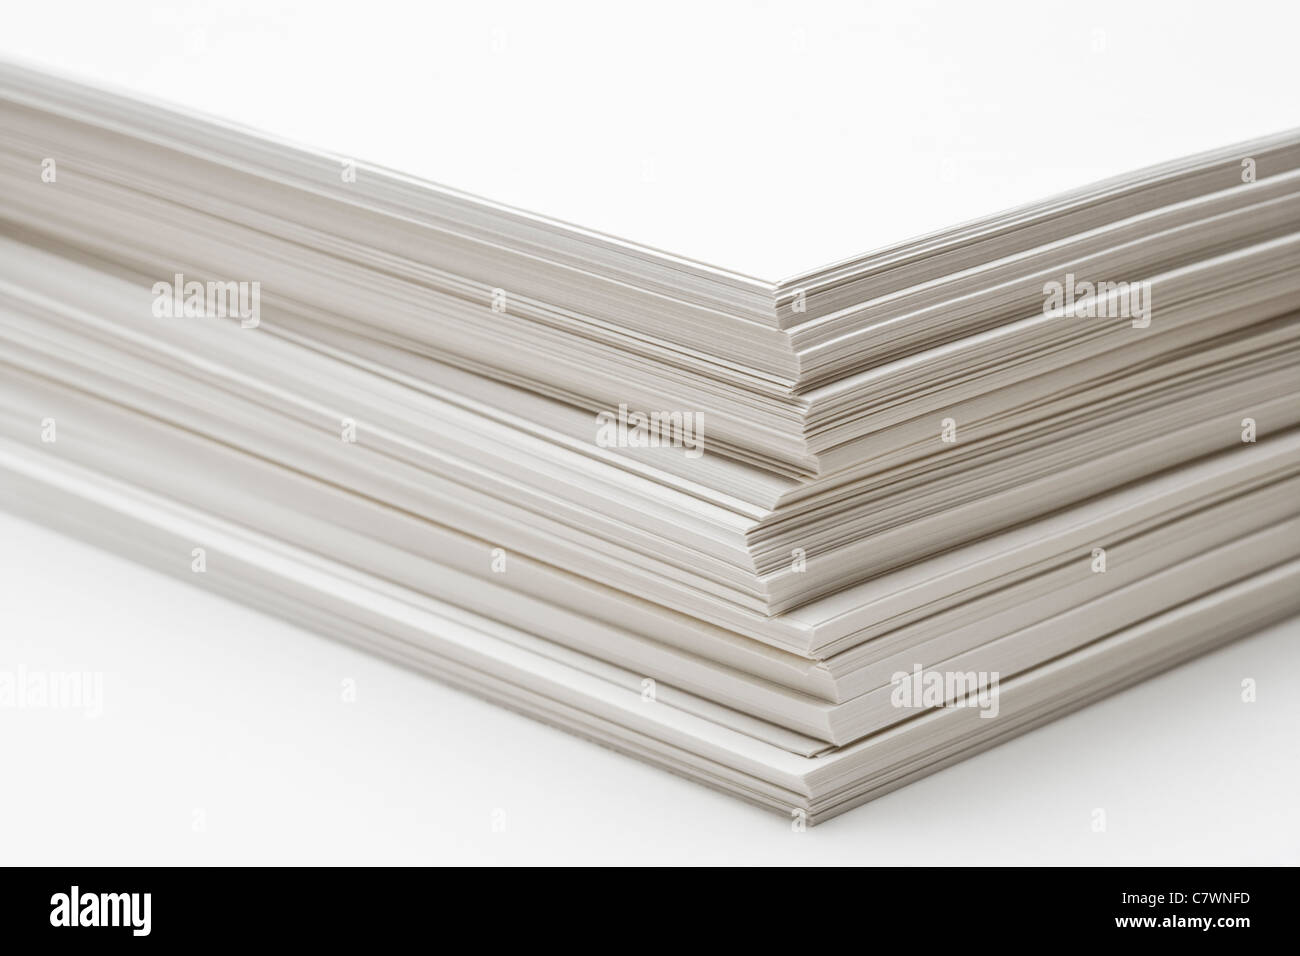 Stack of paper Stock Photo